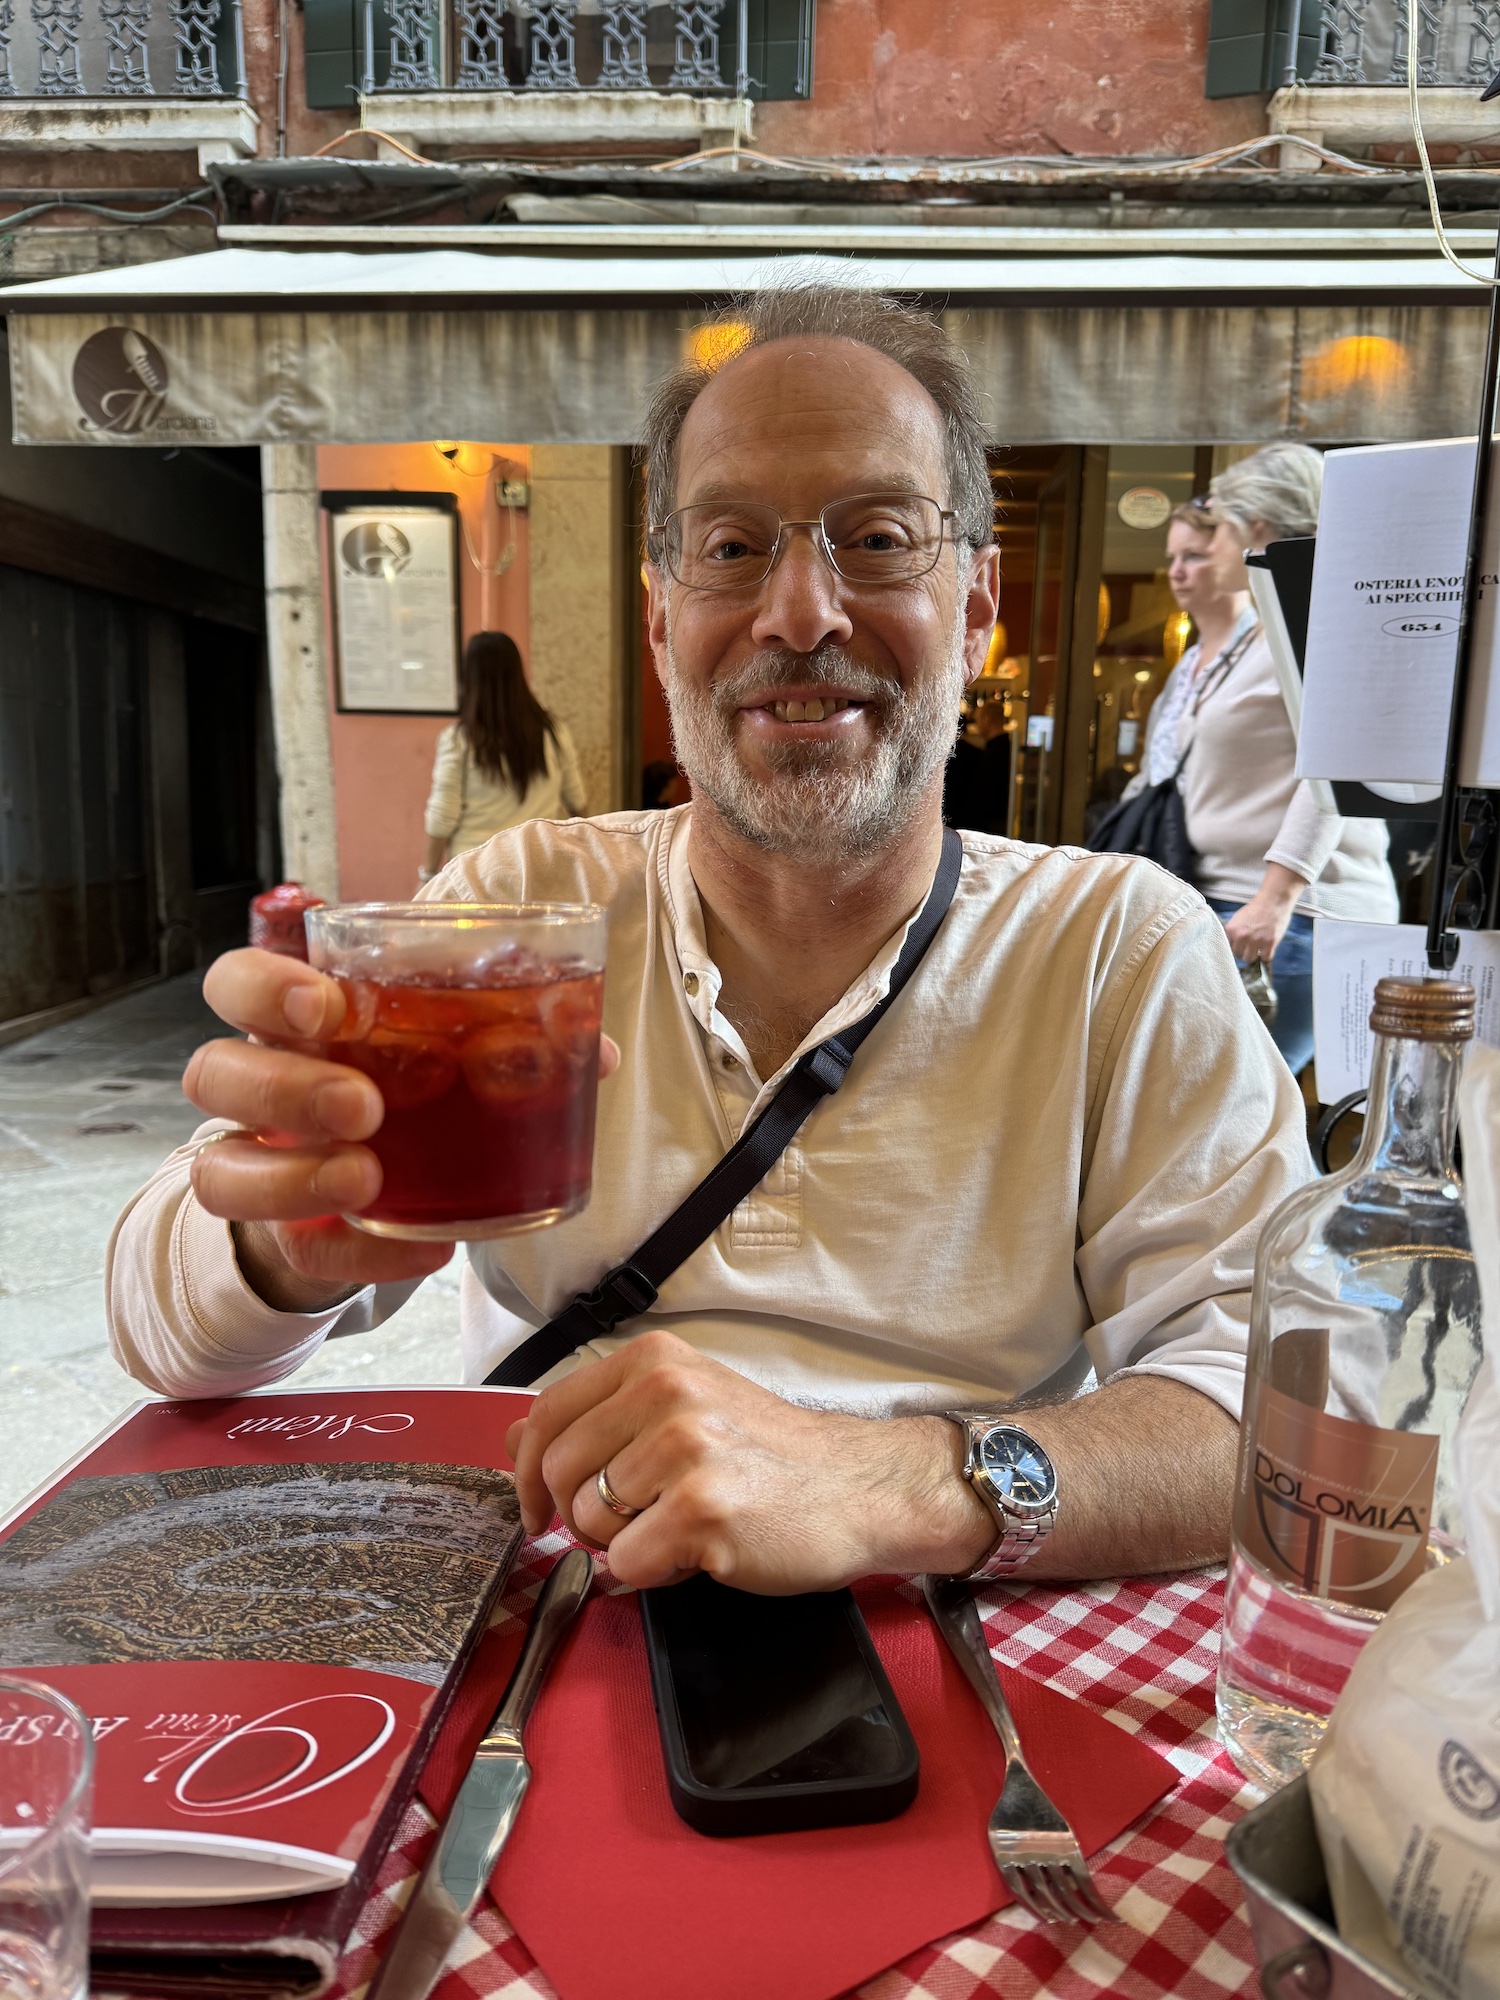 Me and my Negroni, my Negroni and me....